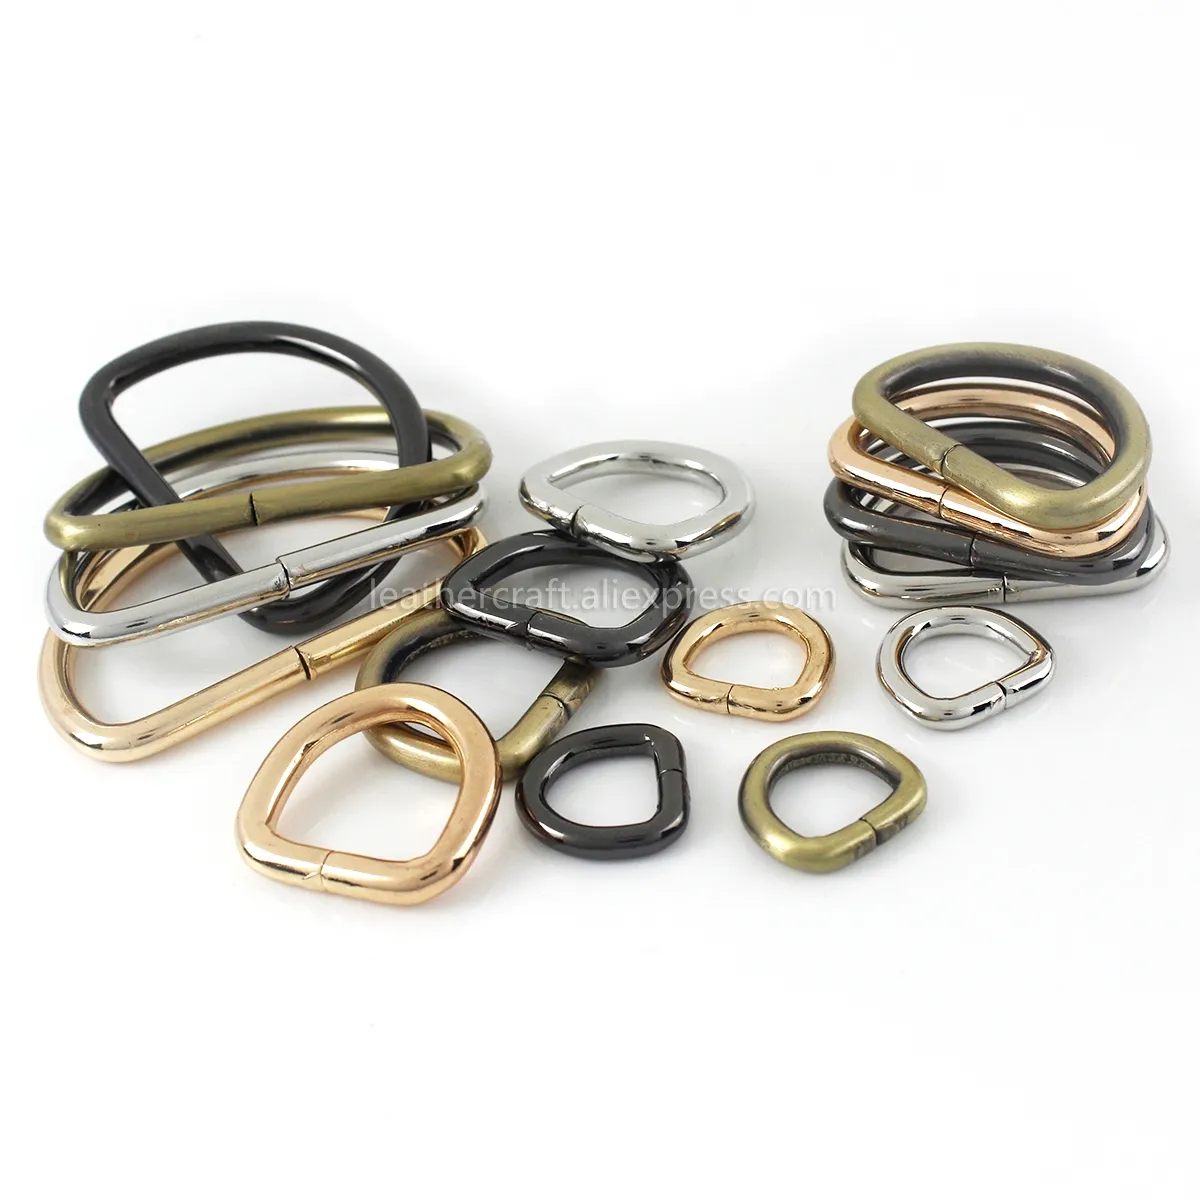 40 Pieces D Rings Rivets for Leather Purse, Gold Ball Studs Rivets D Ring  for Leather Crossbody Purse Craft, Bag Hardware : Amazon.in: Bags, Wallets  and Luggage